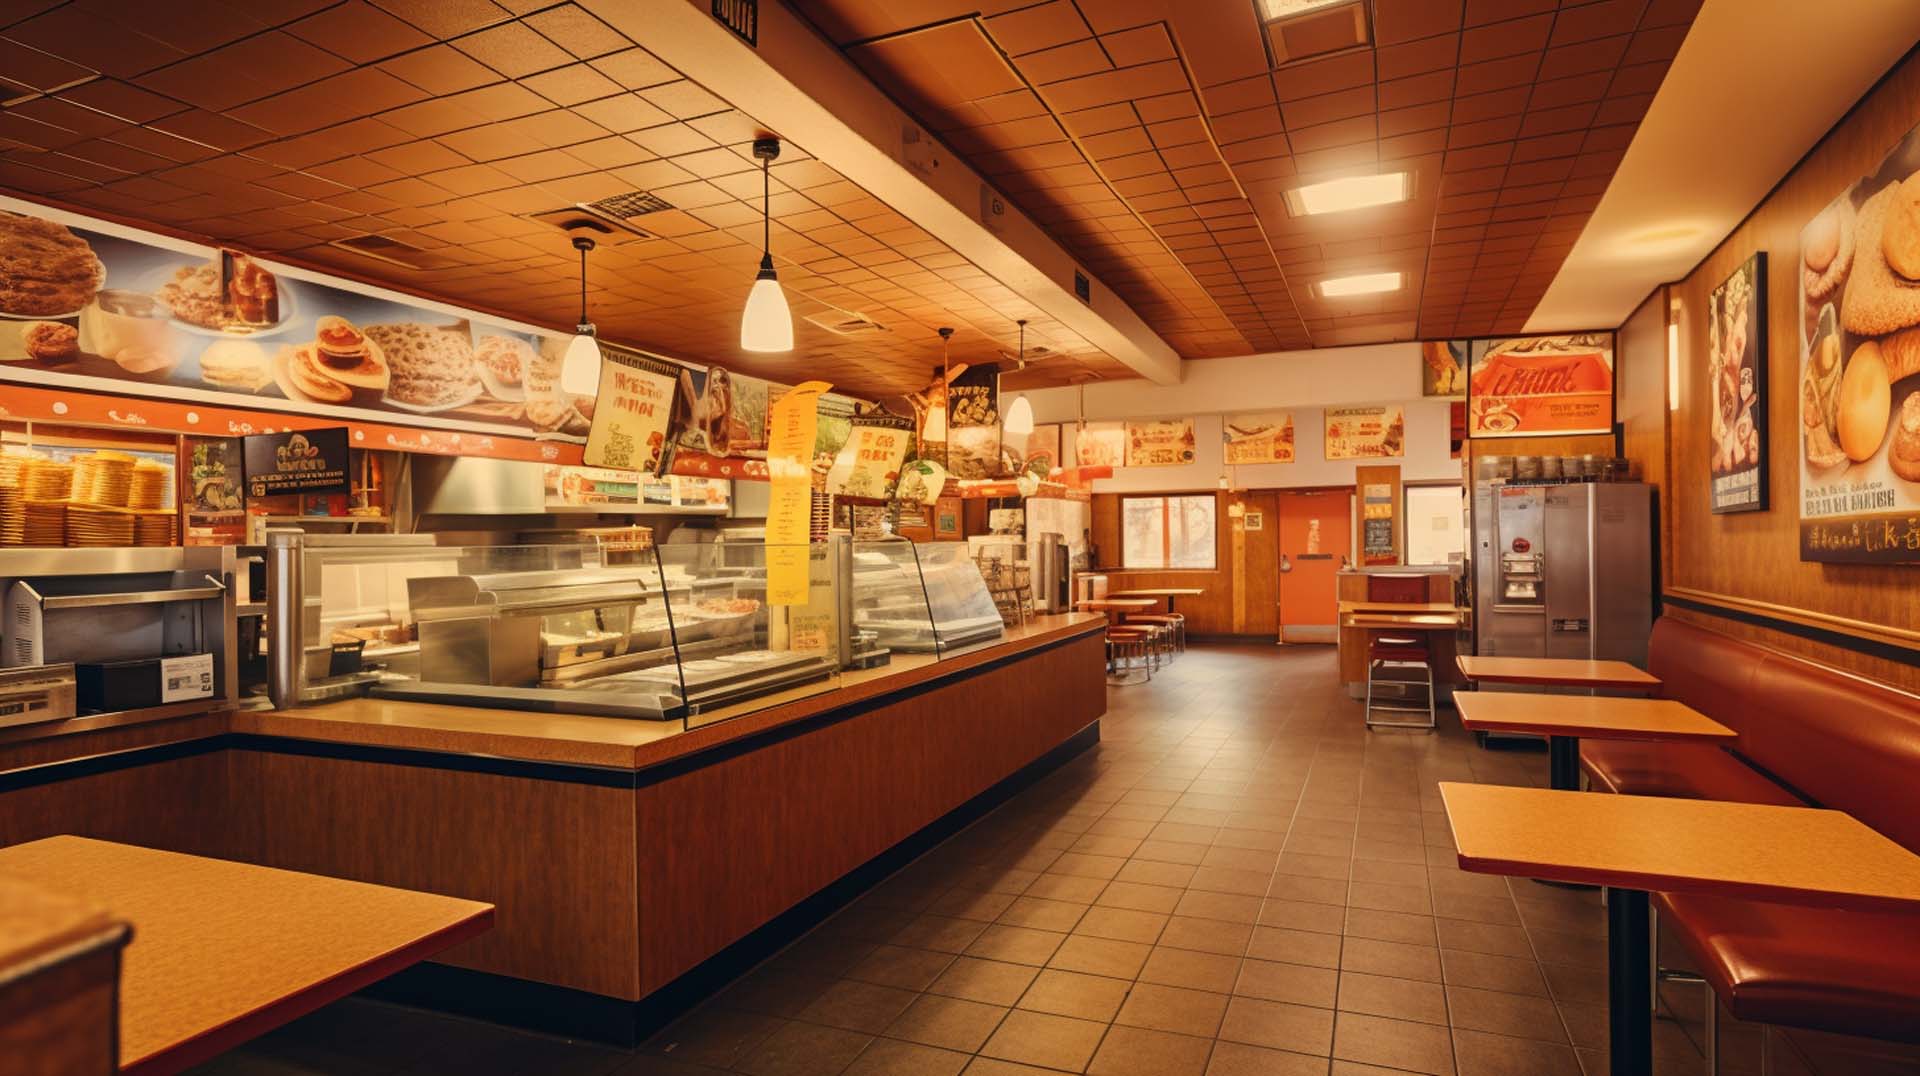 Covington has a wide variety of delicious fast food options to choose from.